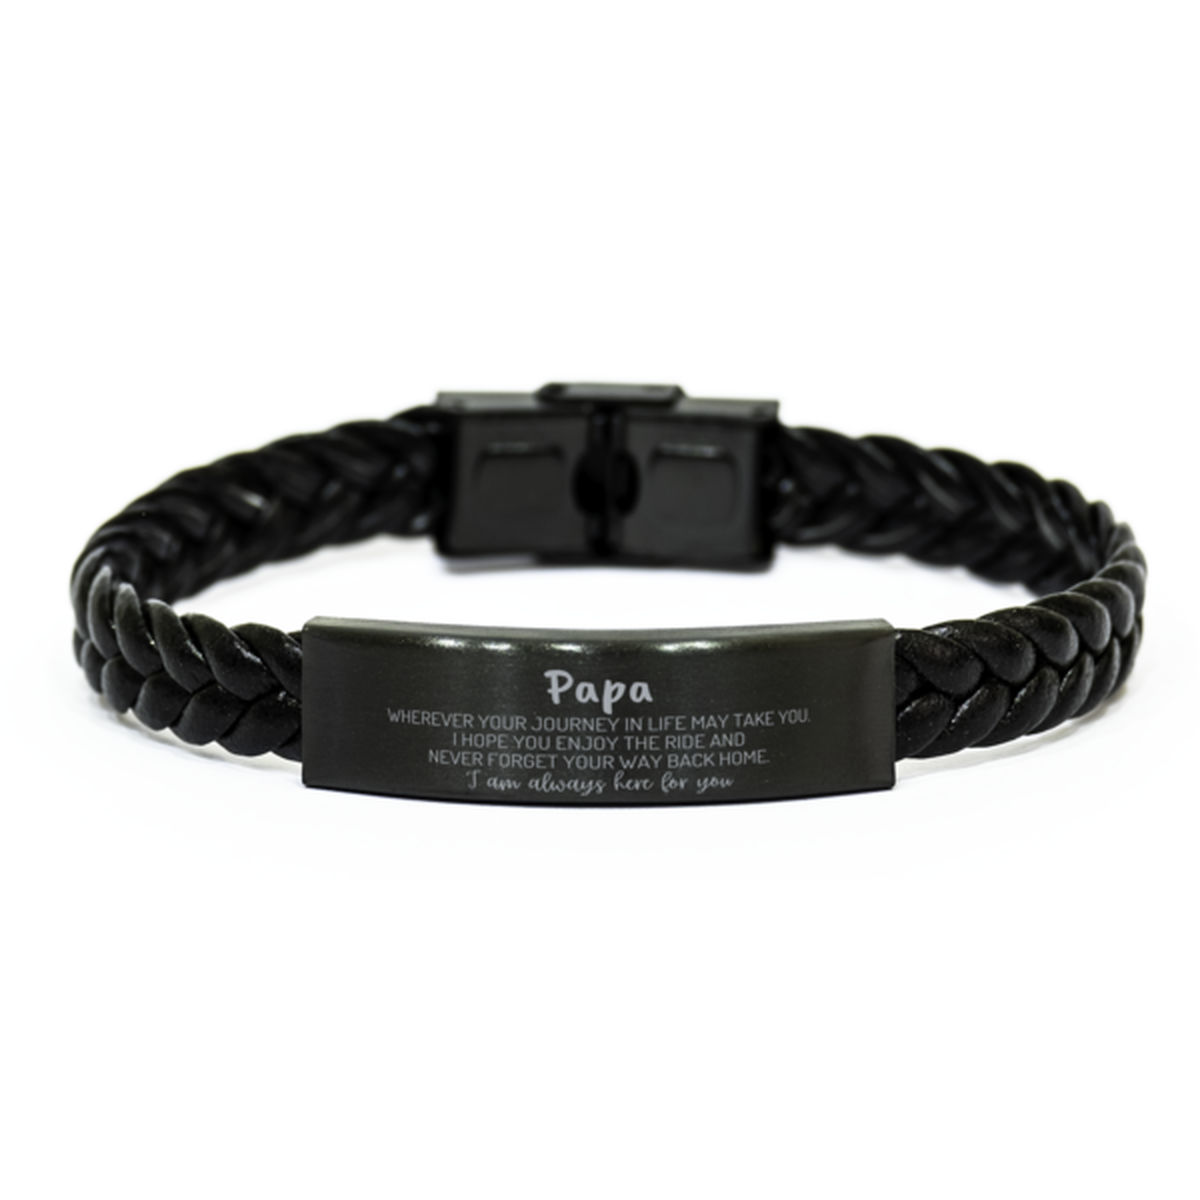 Papa wherever your journey in life may take you, I am always here for you Papa Braided Leather Bracelet, Awesome Christmas Gifts For Papa, Papa Birthday Gifts for Men Women Family Loved One